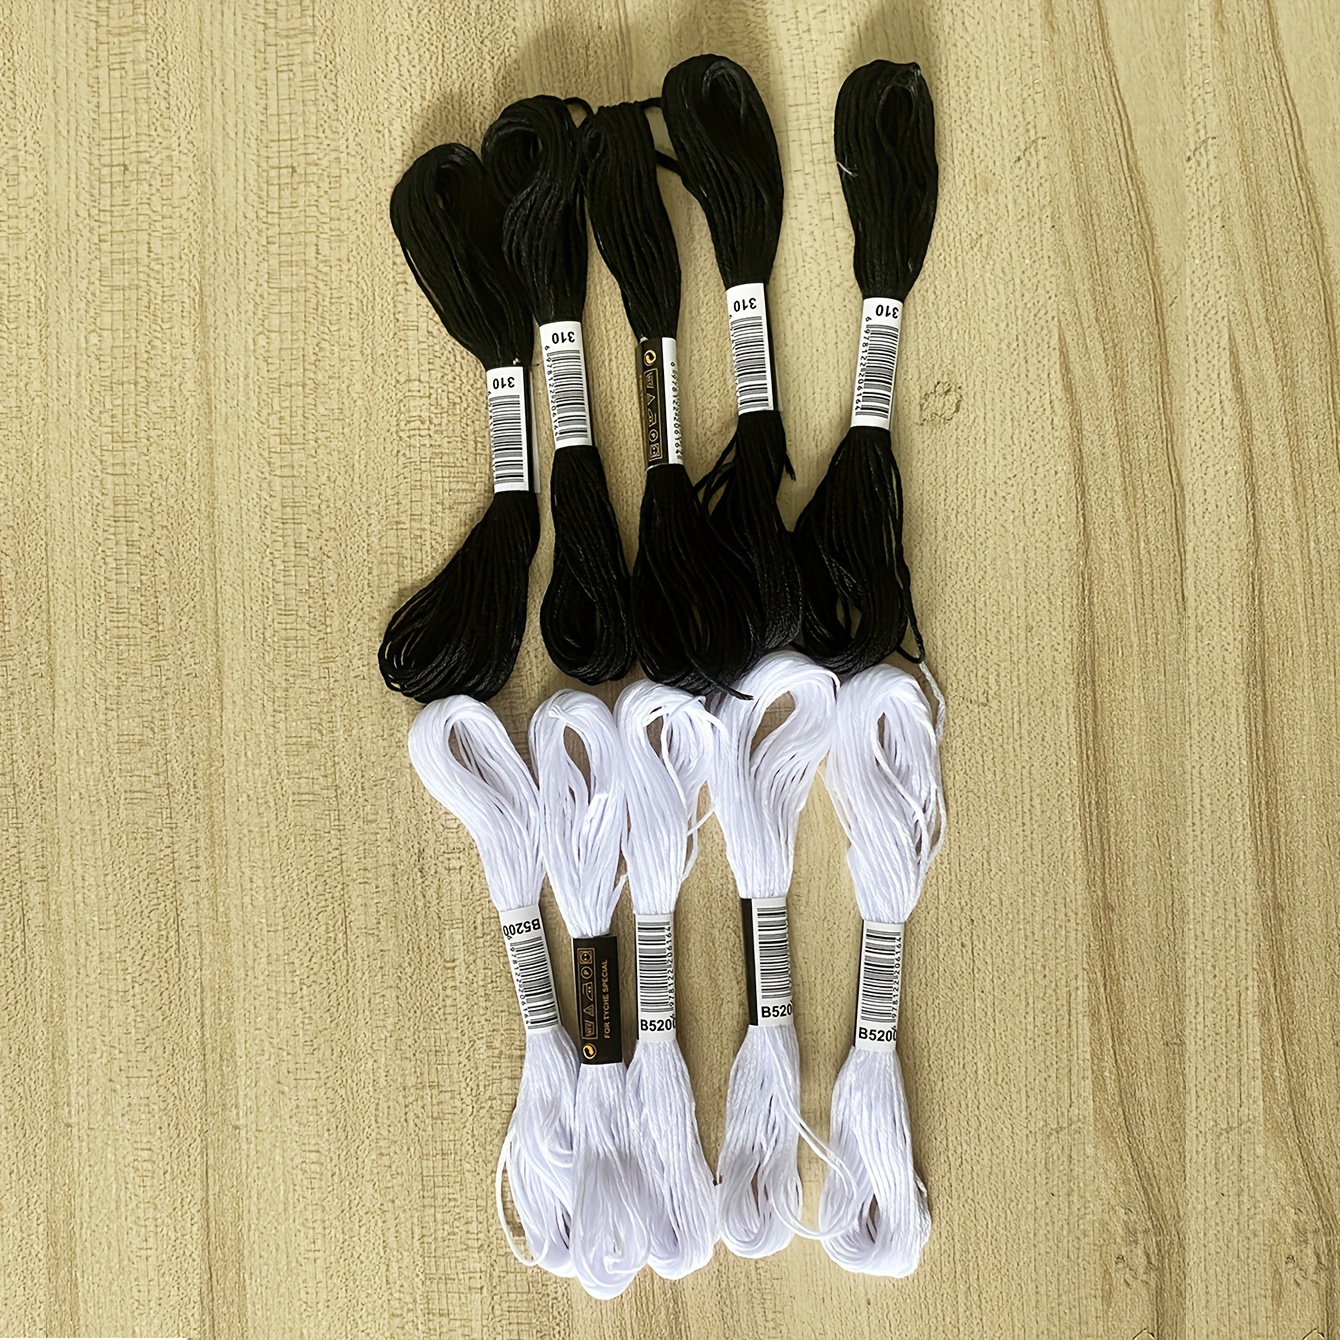 10pcs/set White And Black Cross Stitch Embroidery Thread, Hand Embroidery  Floss, For DIY Sewing